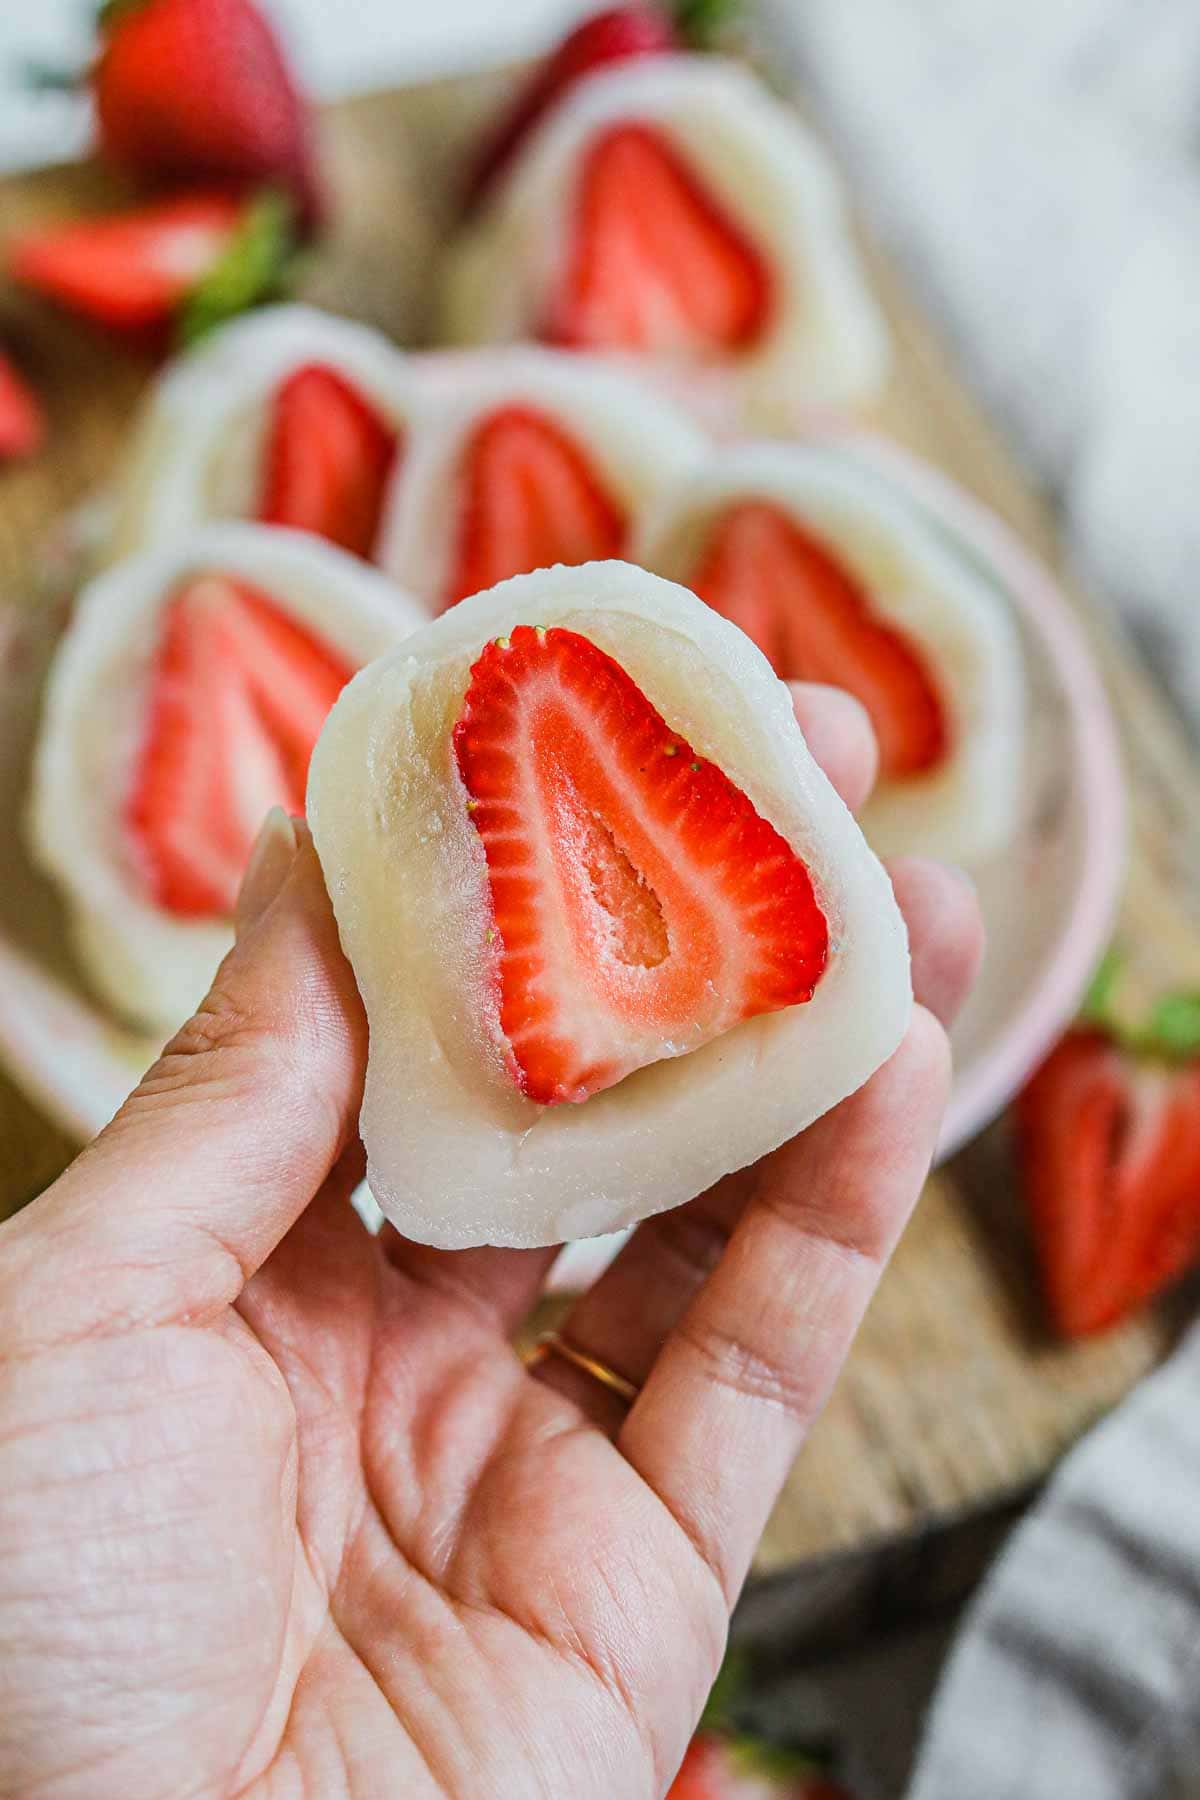 Hand holding a strawberry daifuku (mochi with bean paste) cut in half, revealing the strawberry and shiroan center.